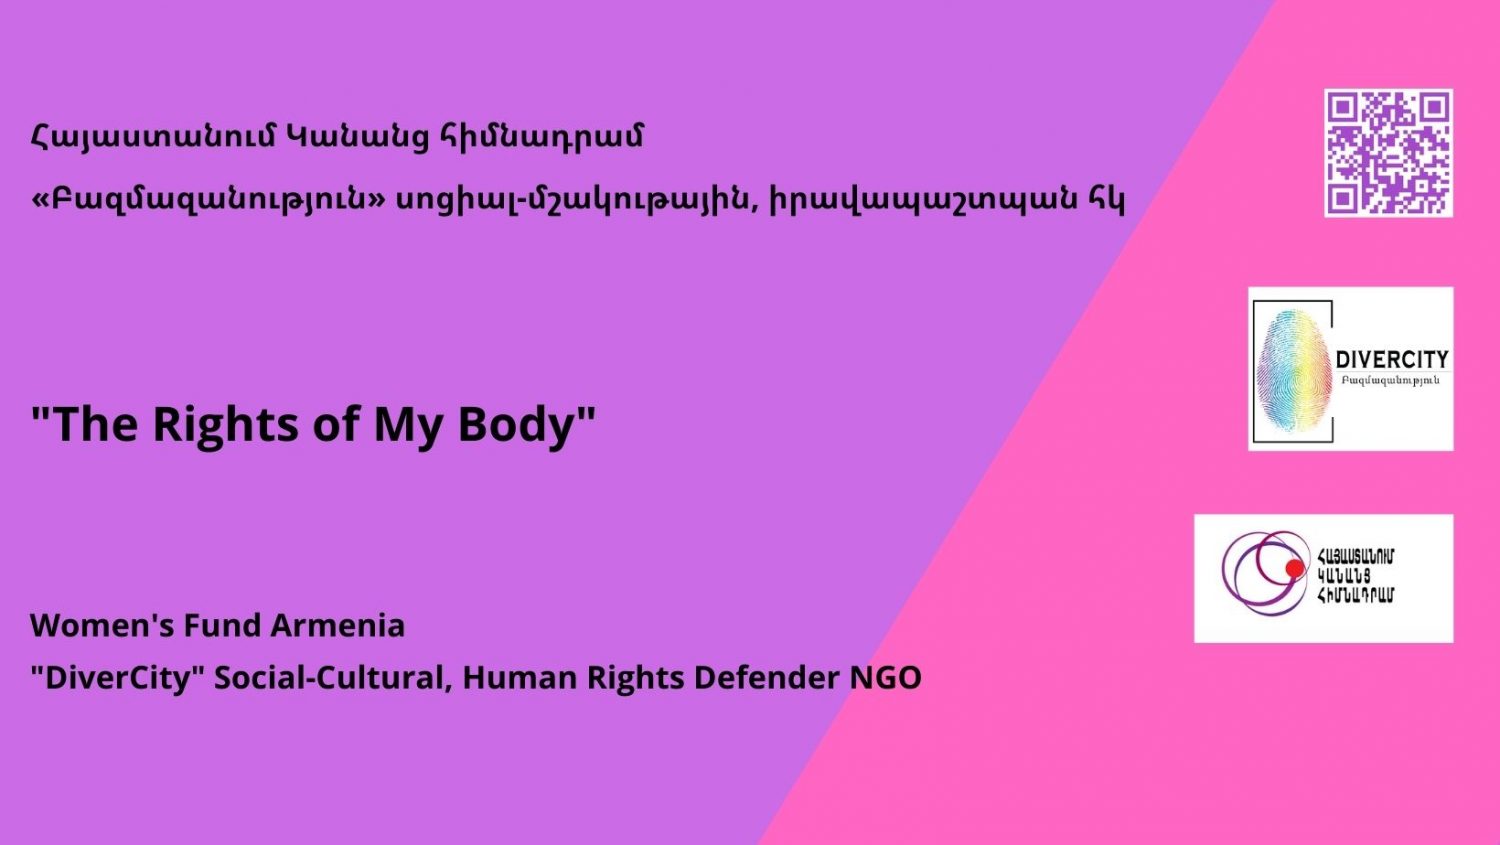 The Rights of My Body